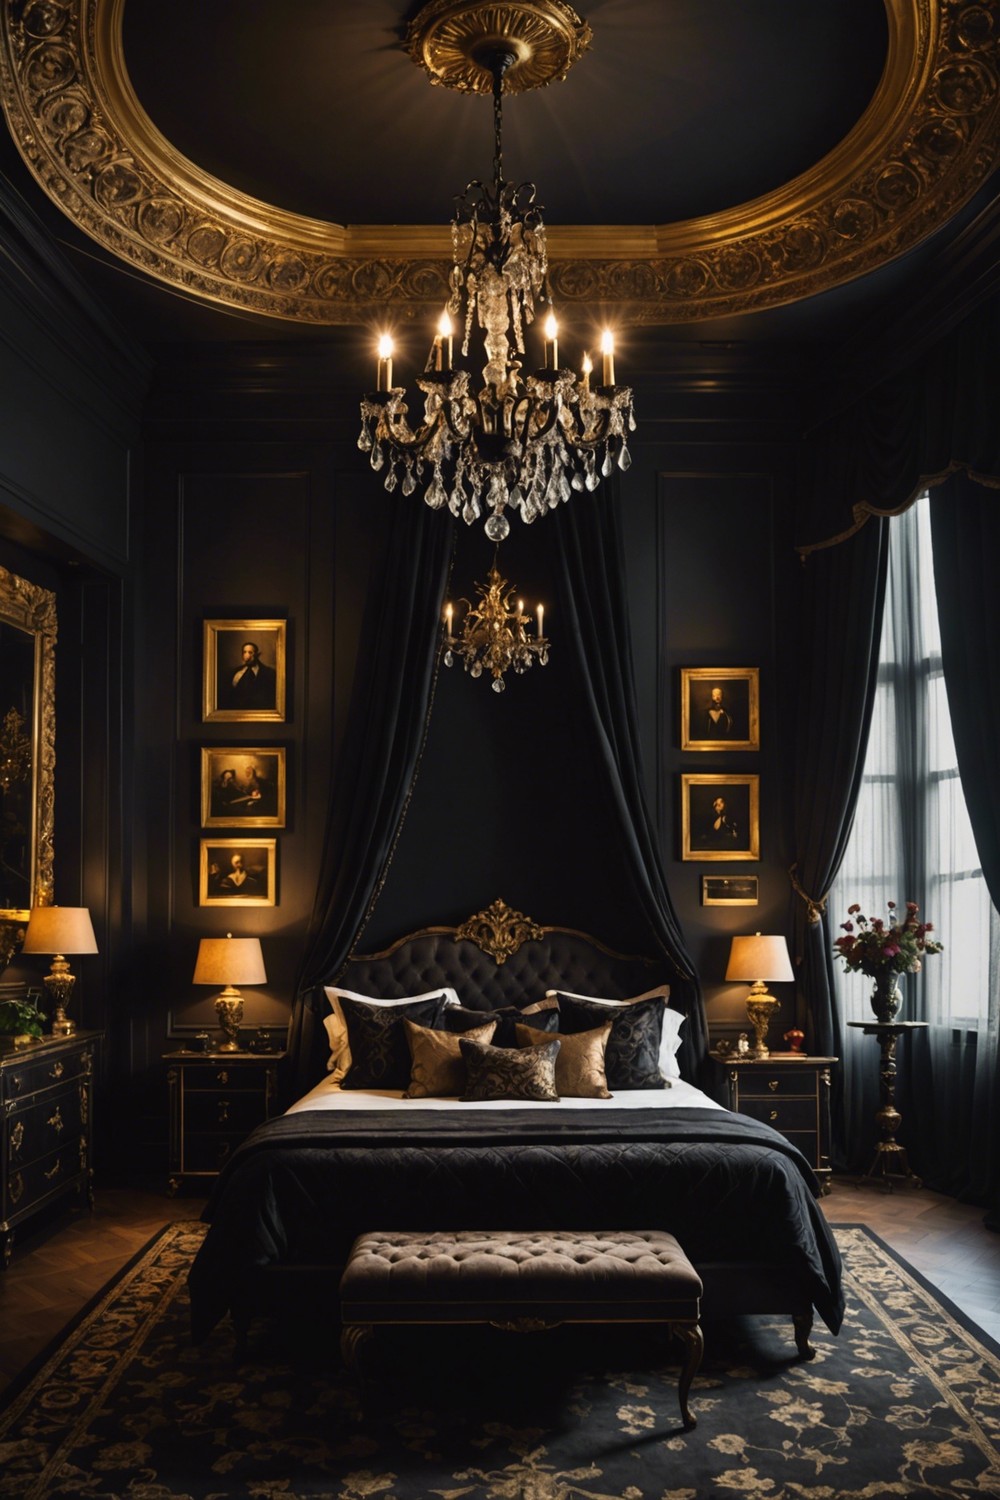 Moody and Dramatic: Hanging Black Chandeliers above a Dark-Colored Bed